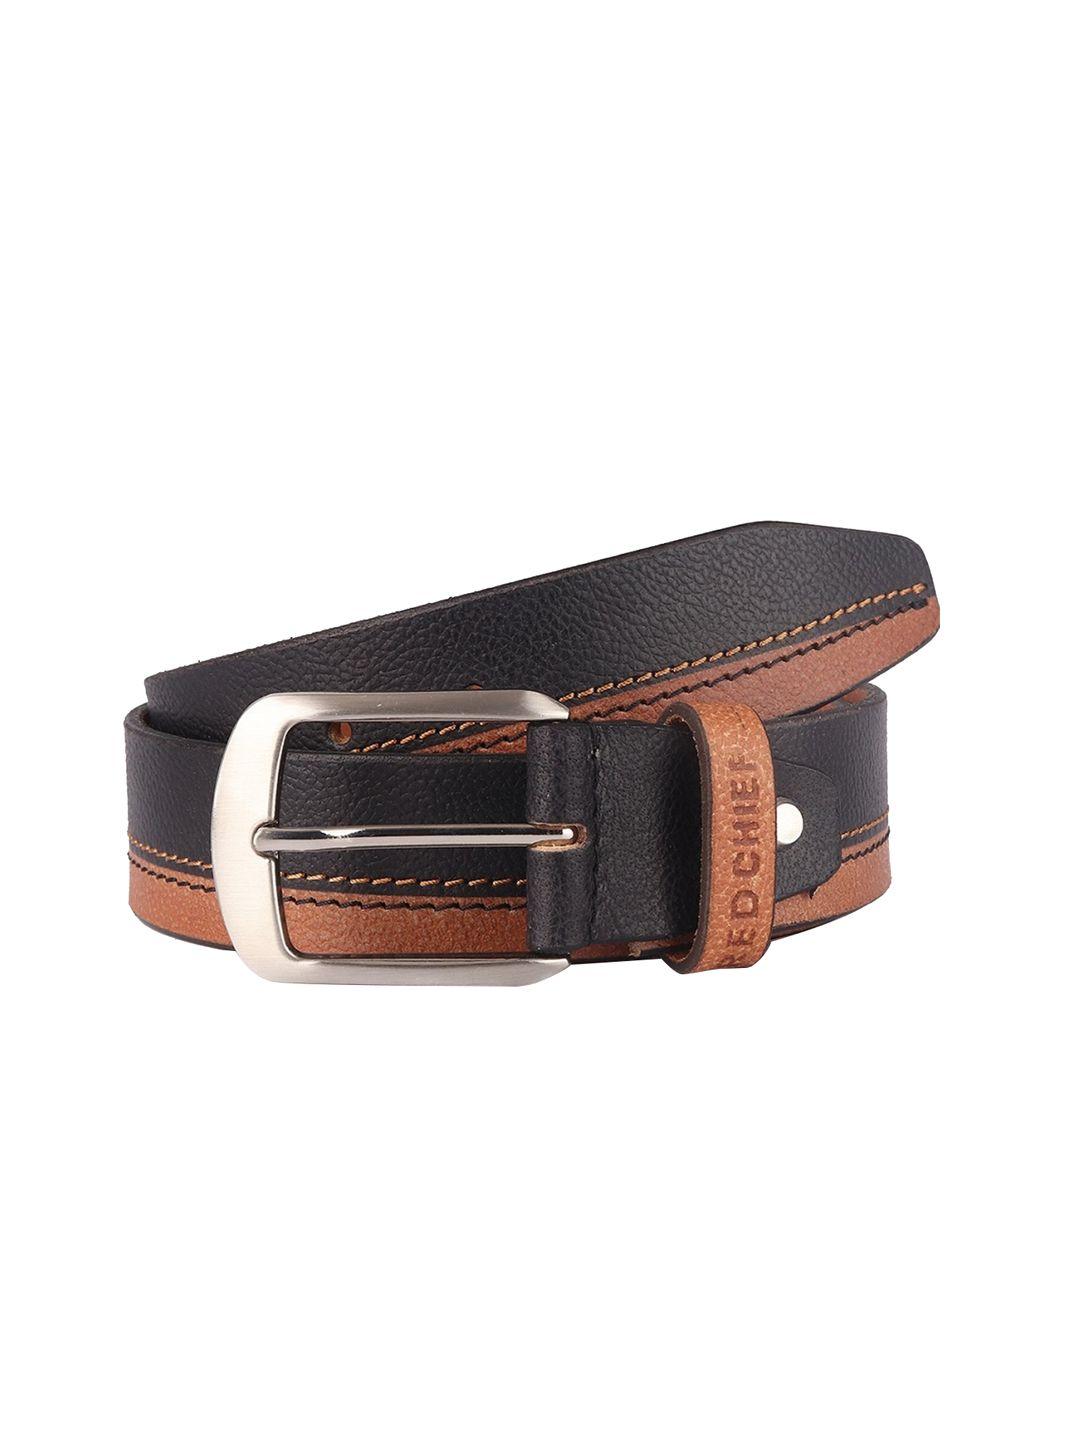 red chief men tan leather colorblocked belt